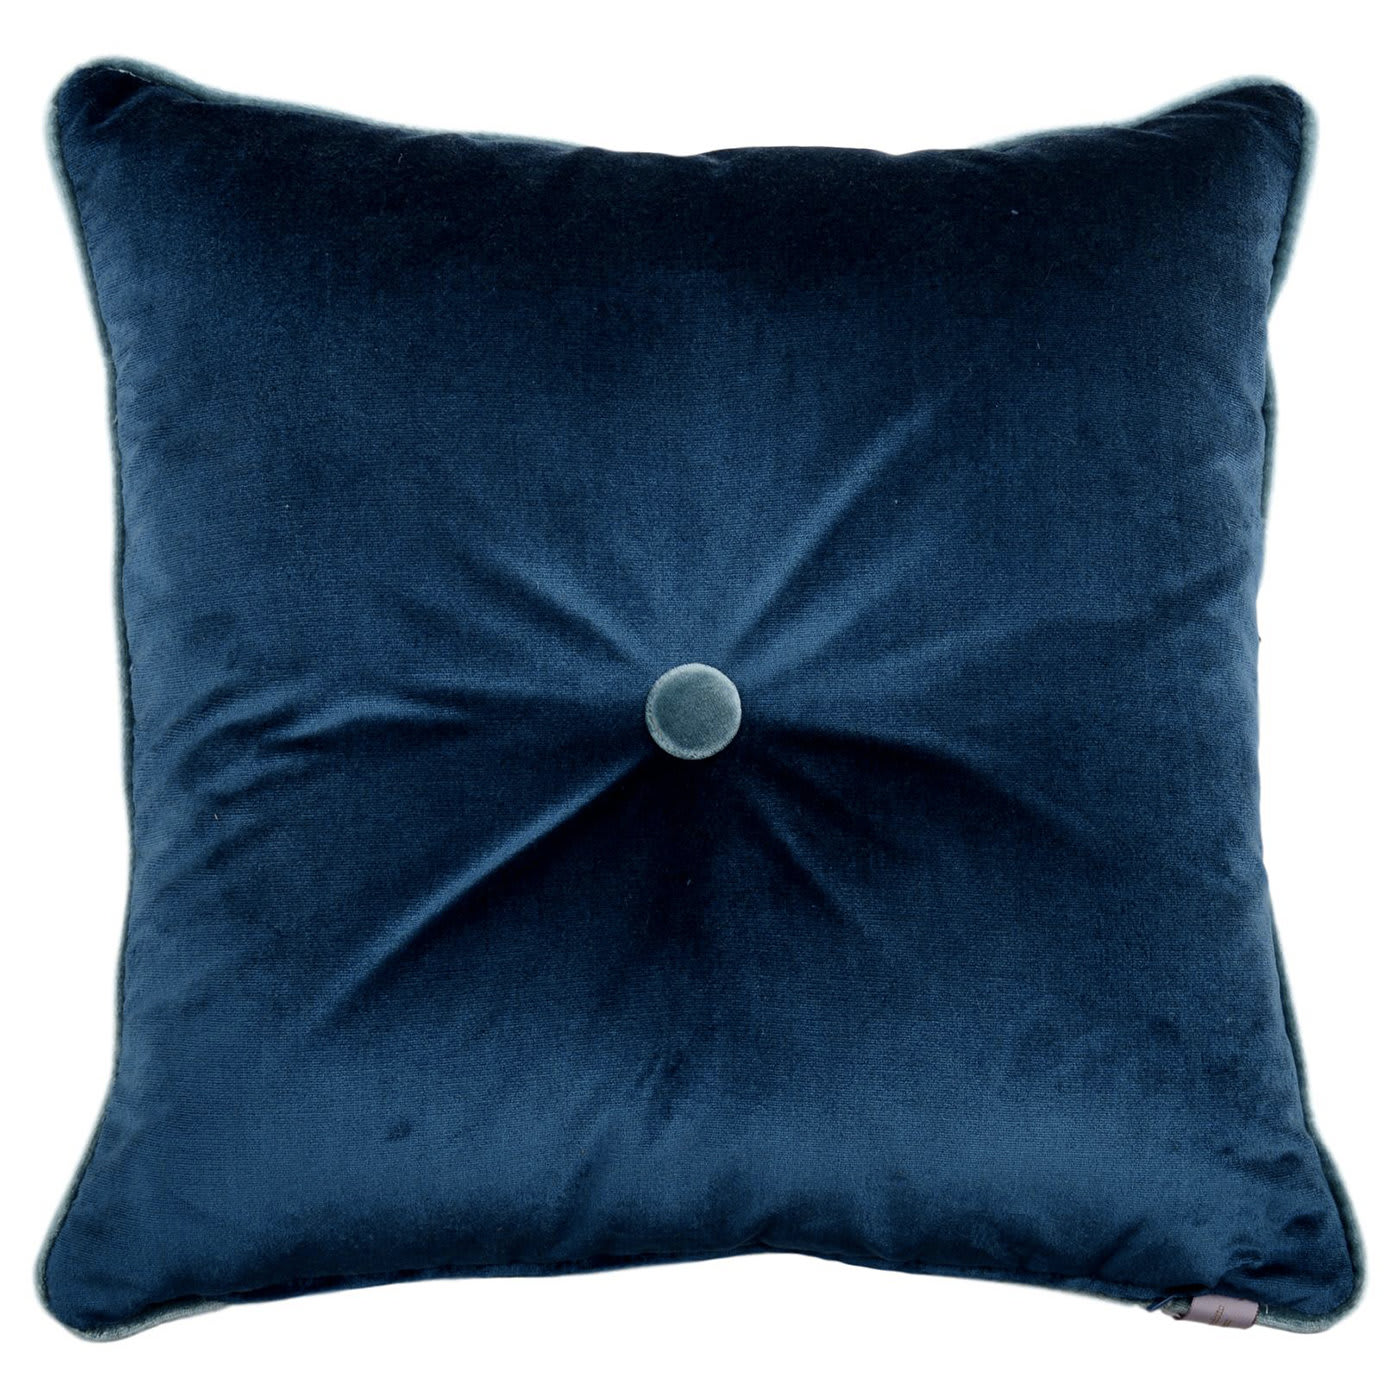 Carré Tufted Pale-Blue and Grey Cushion - l'Opificio